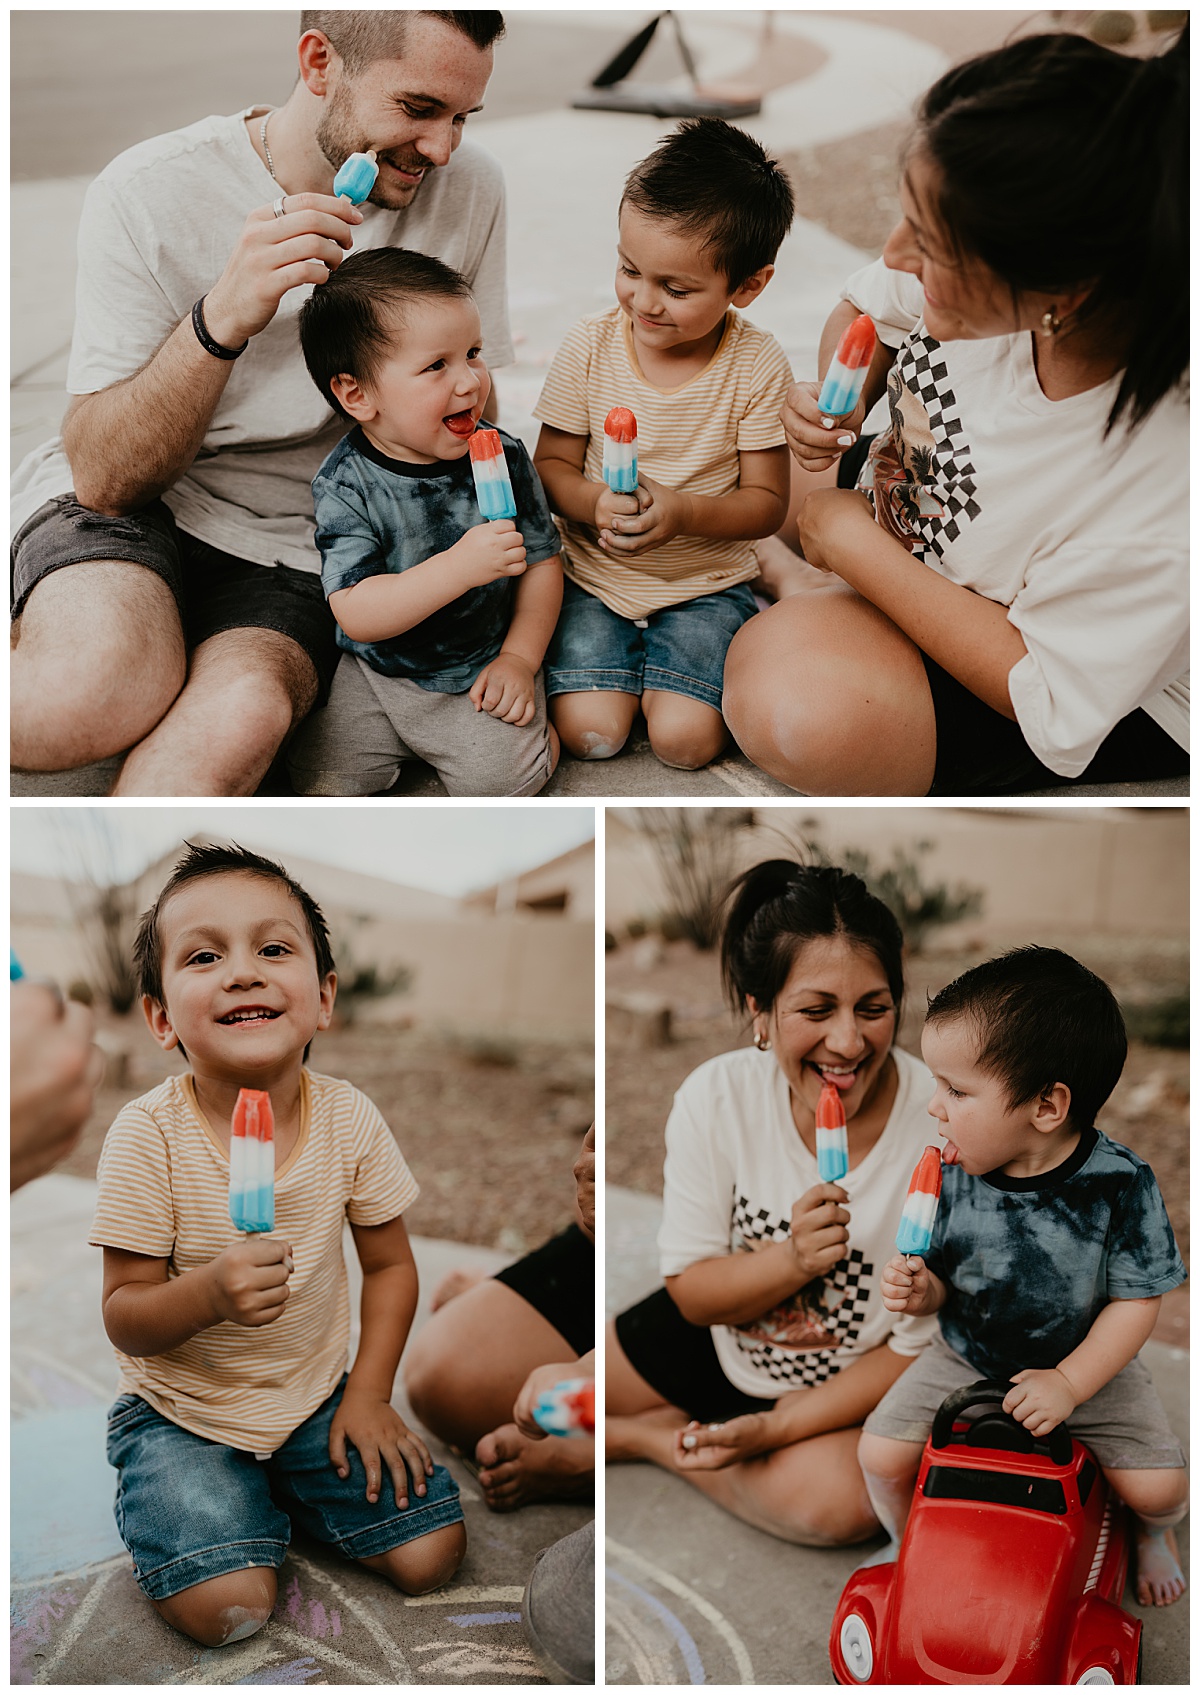 Family eating popsicles in the driveway for their family portraits in Tucson, Arizona taken by Alexa Rae Photo, a Tucson Family Photographer.